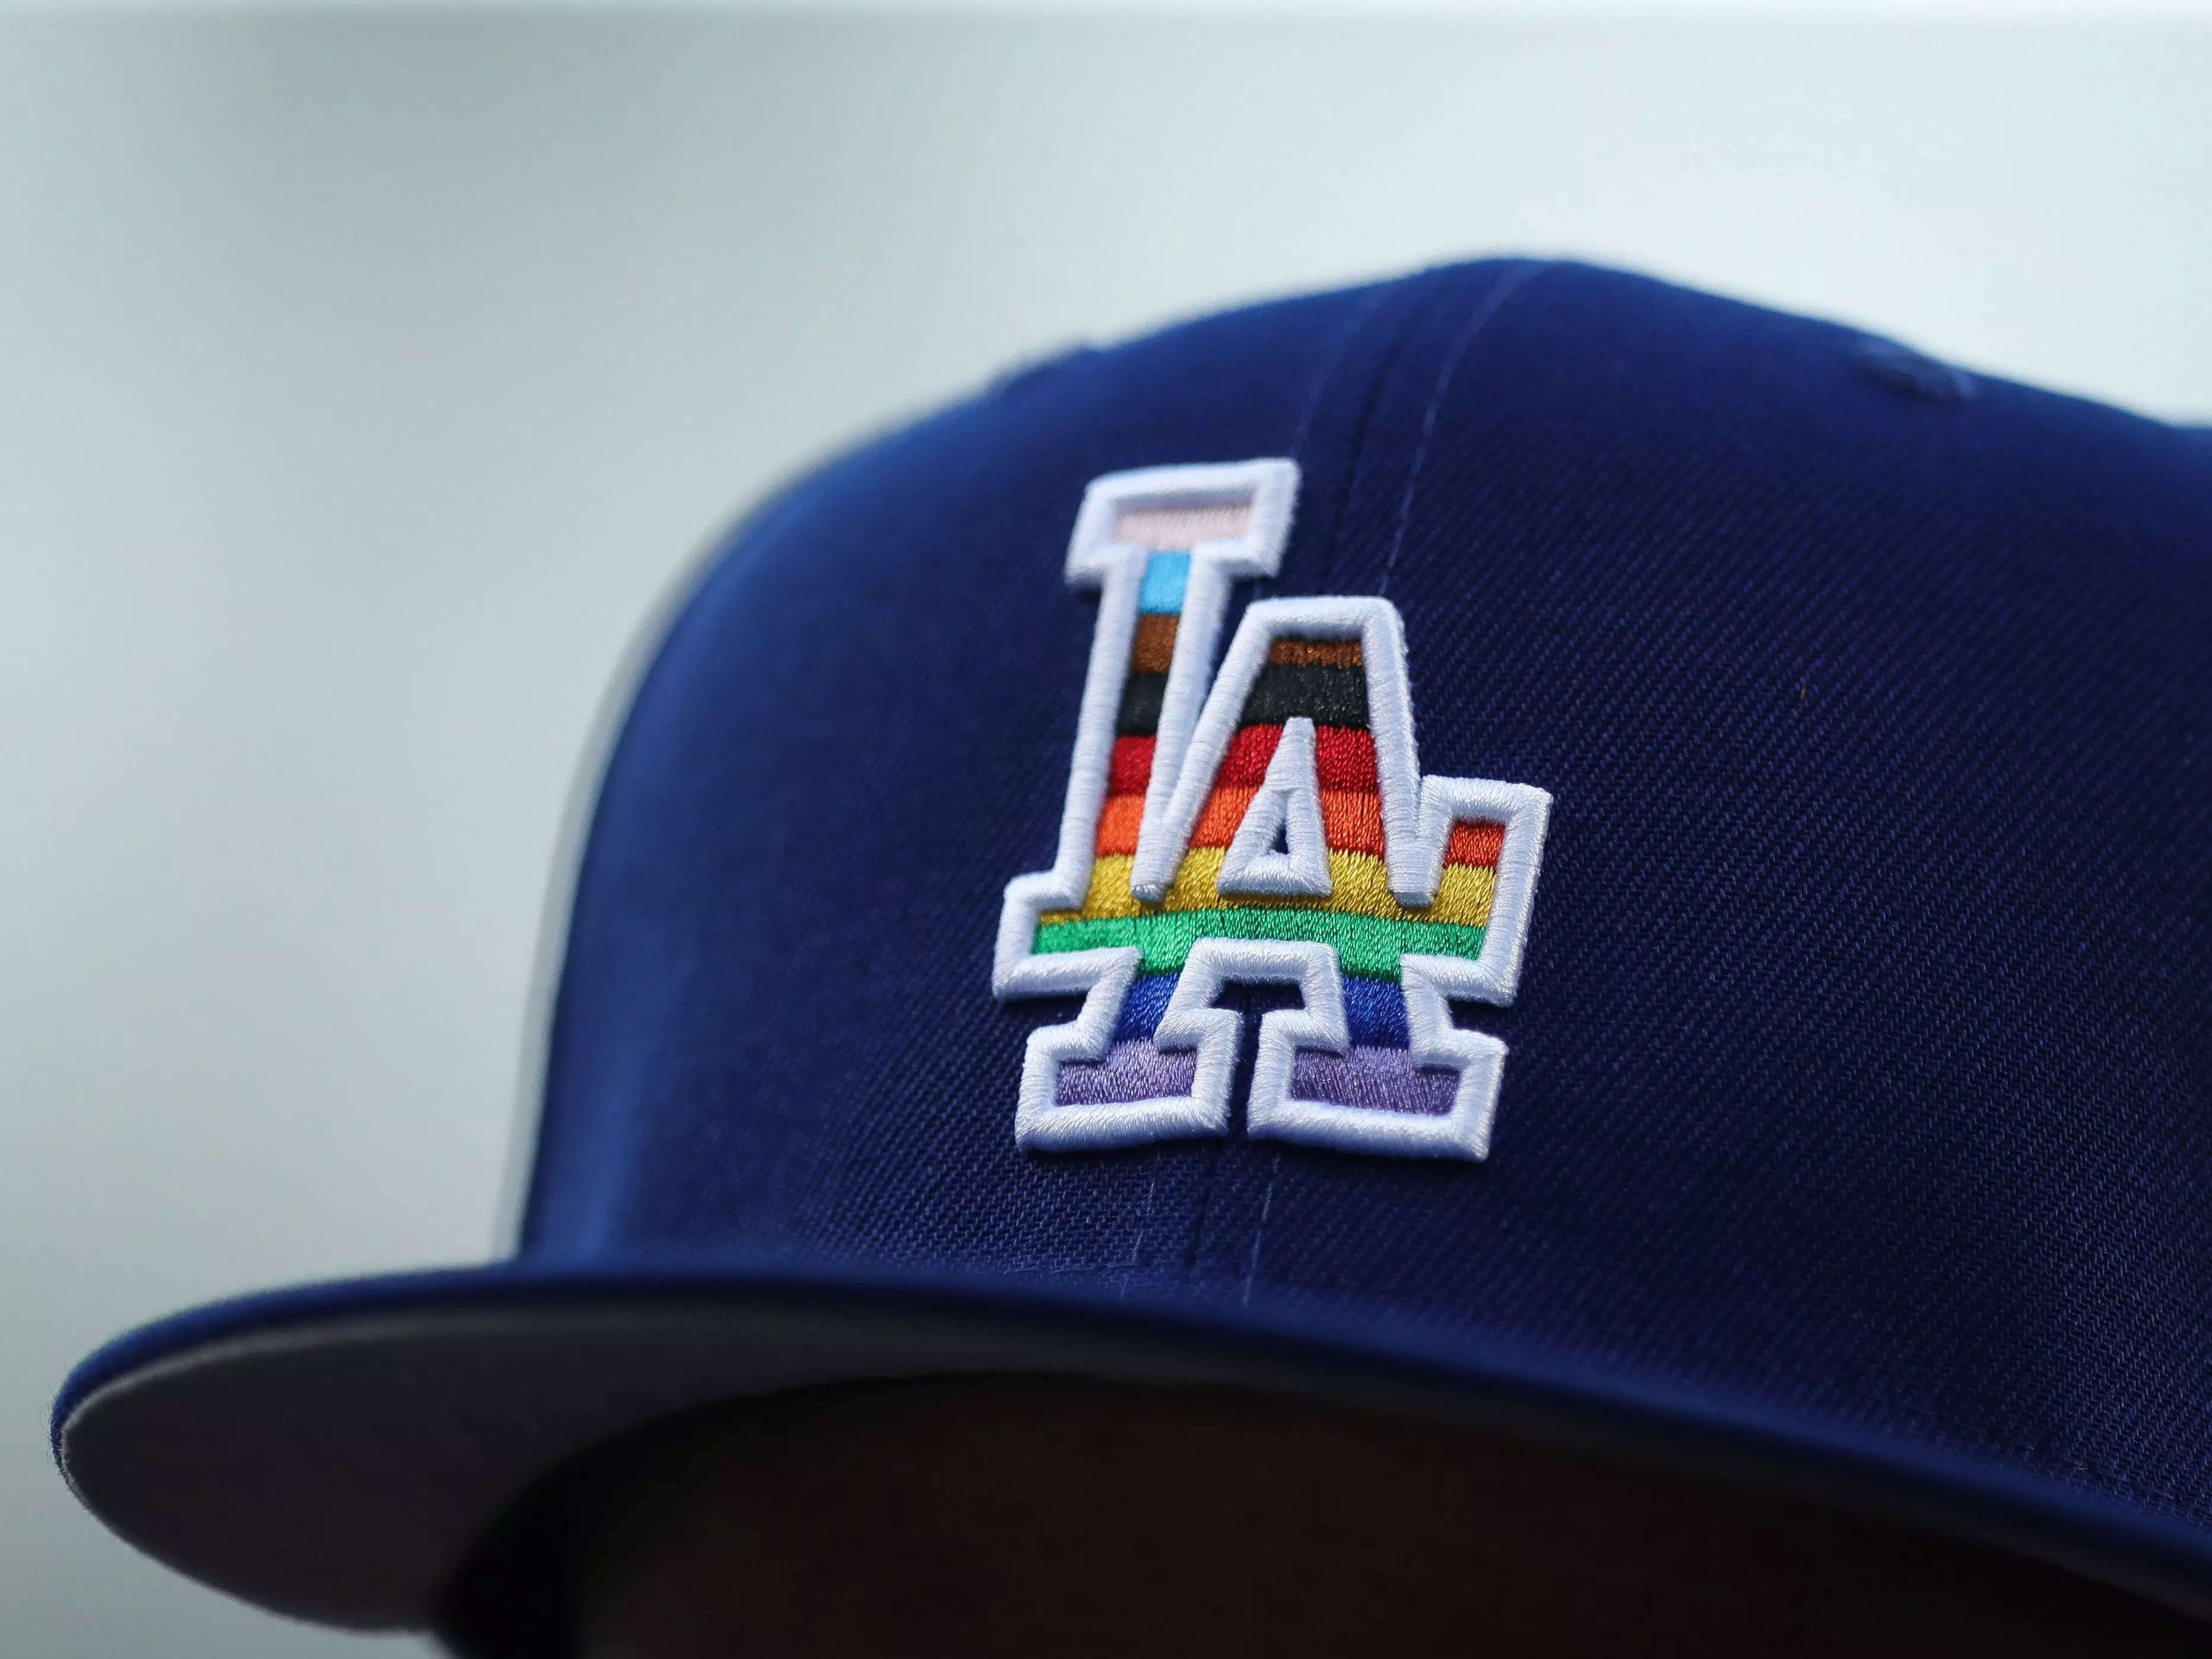 Dodgers facing backlash after disinviting LGBTQ group from Pride